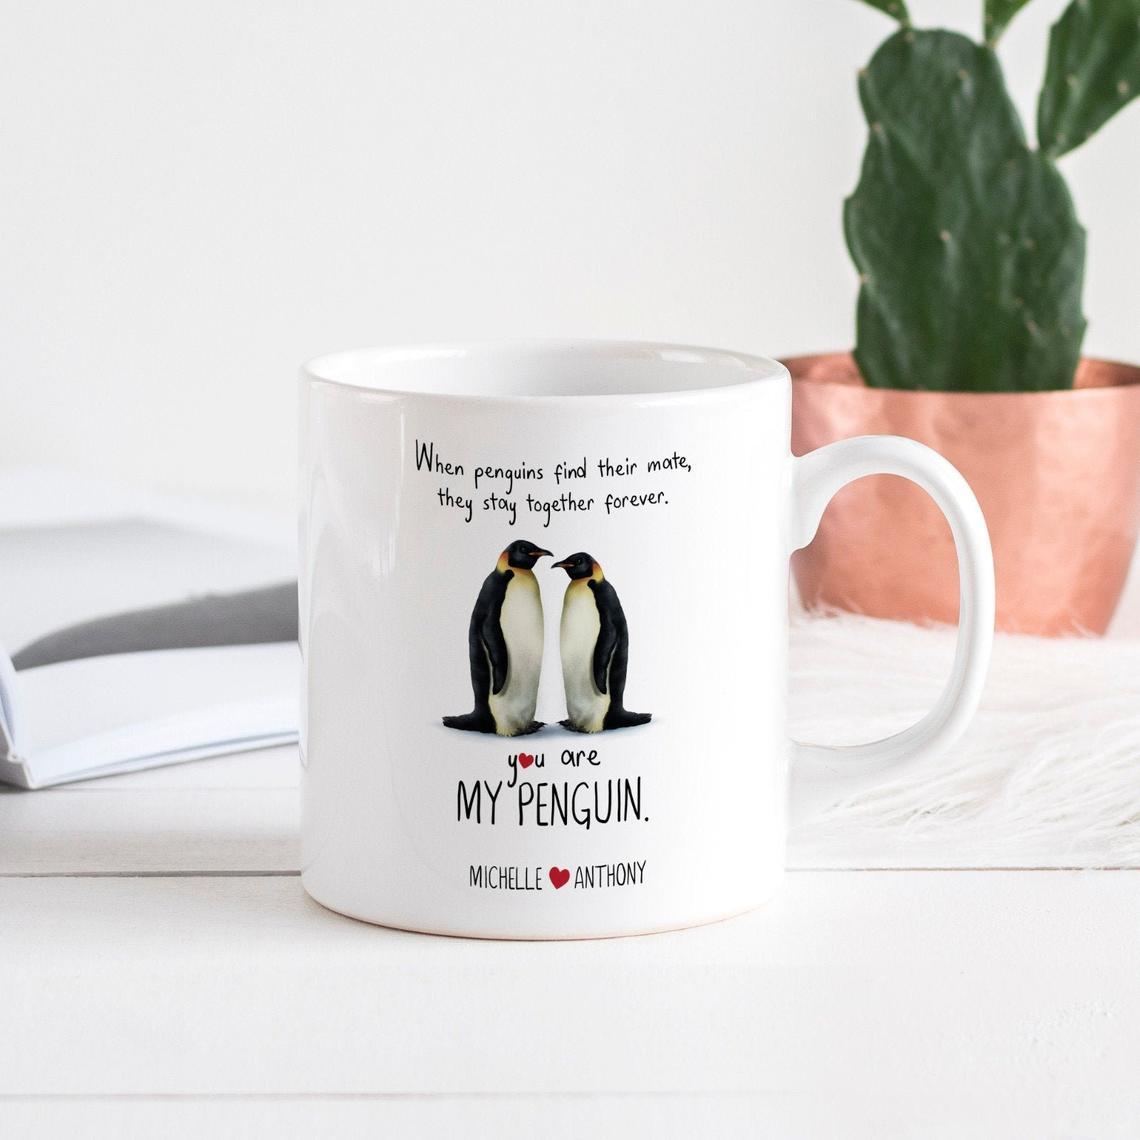 Penguins Mug, You are my penguin, Valentines gift, Funny gift